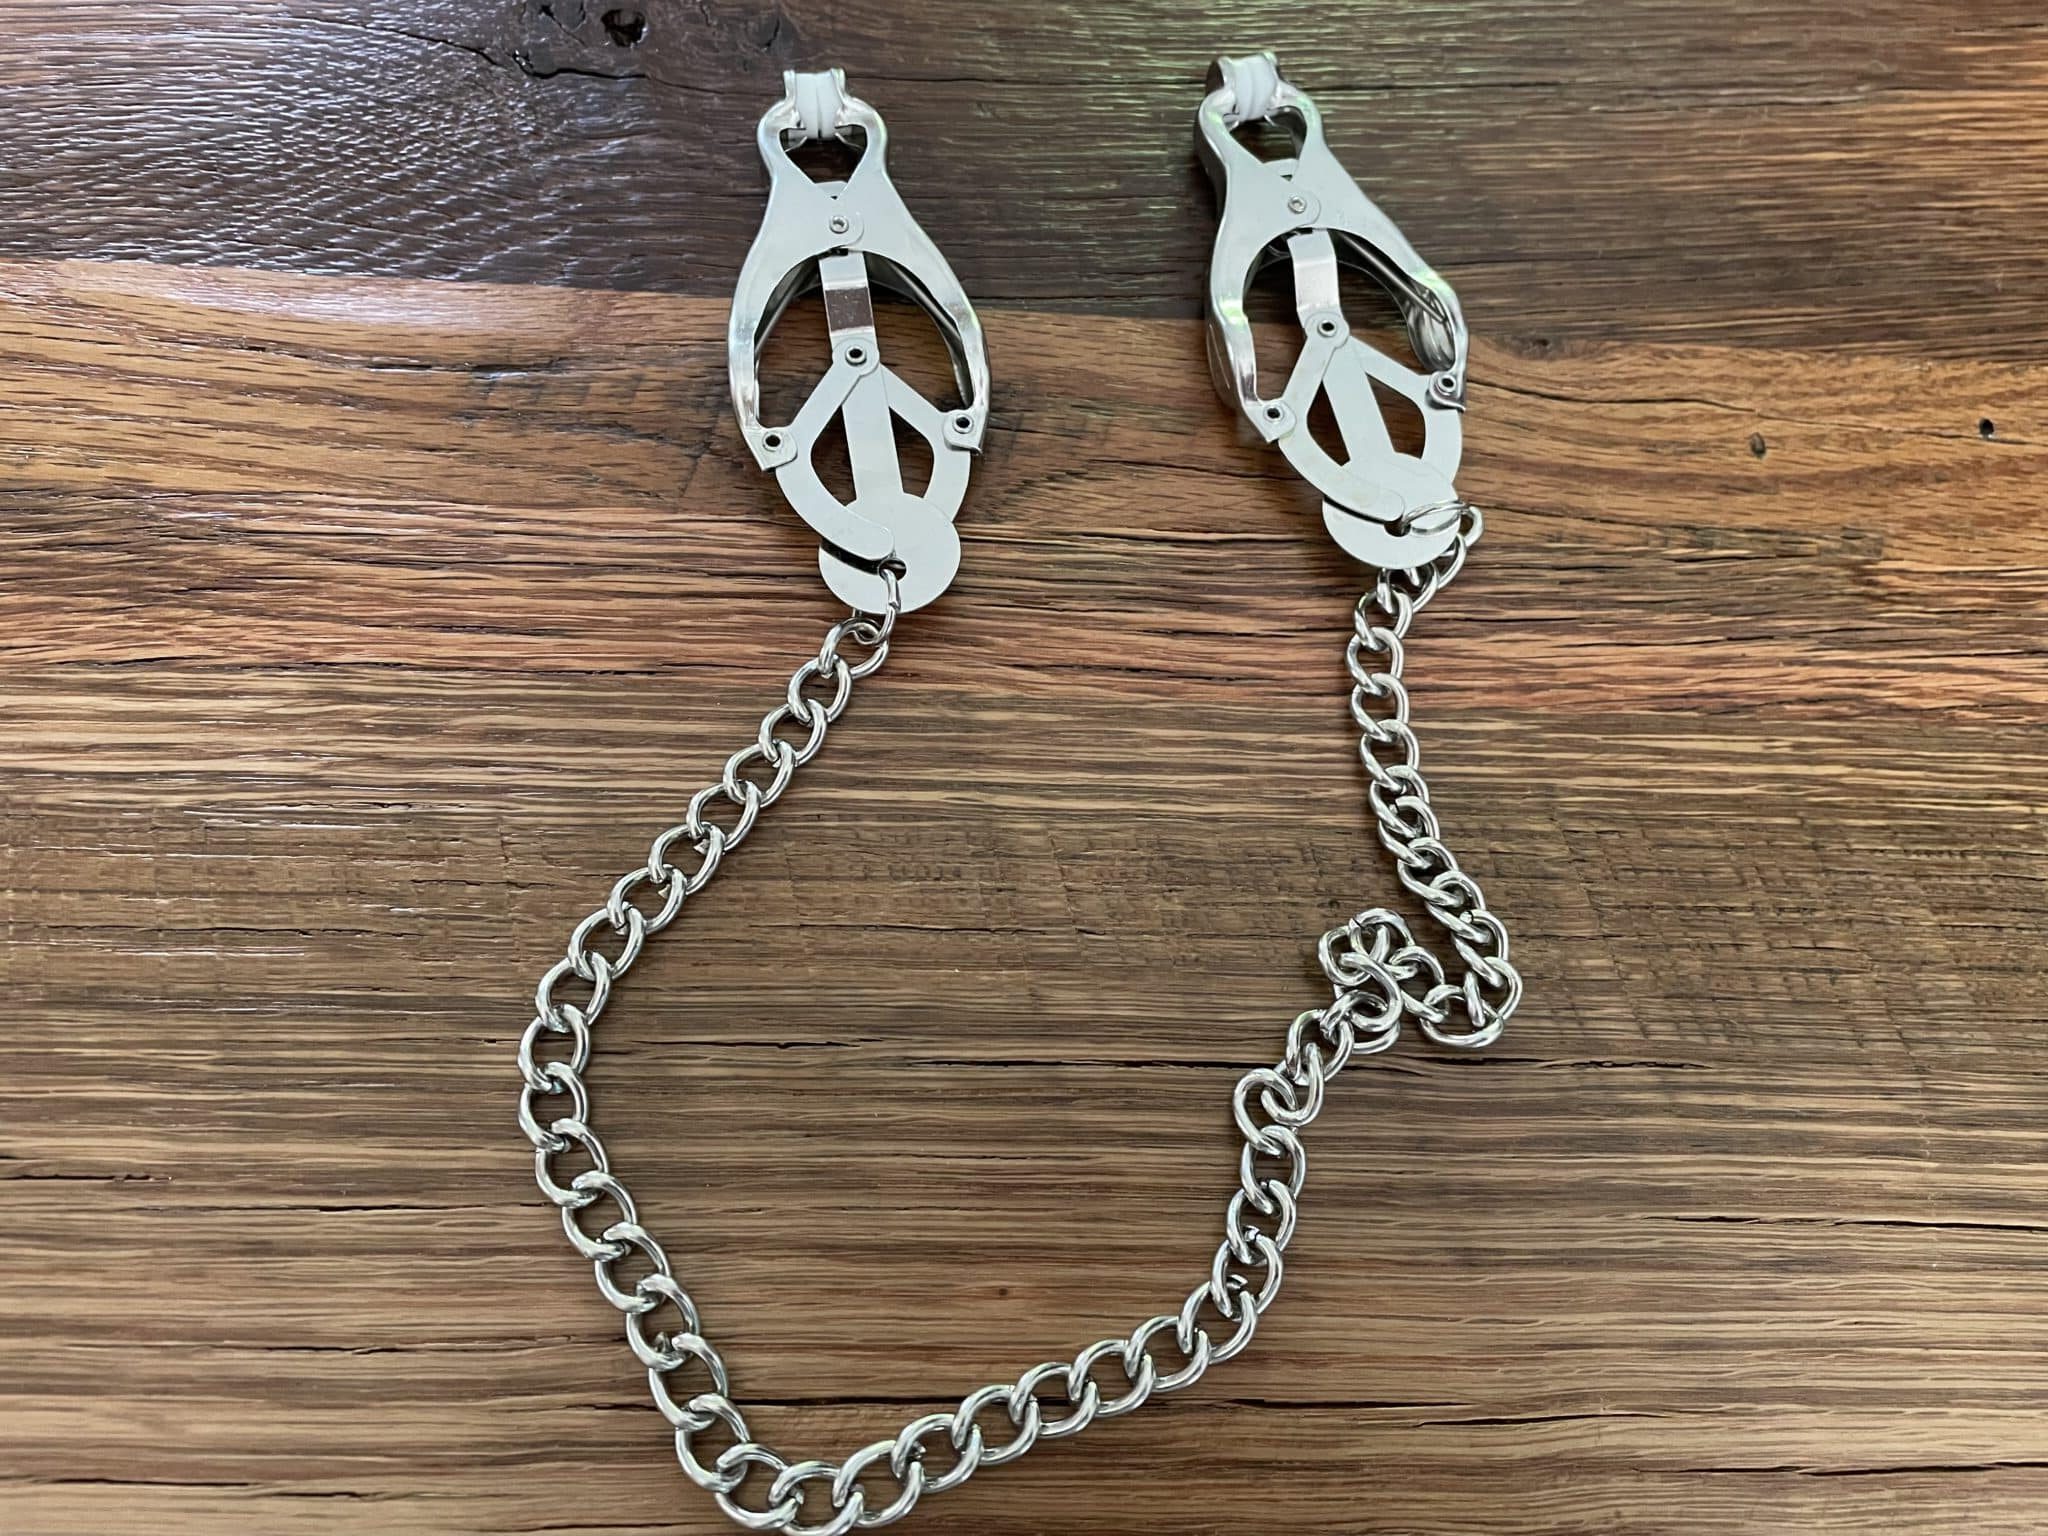 Bondage Boutique Squeeze and Tease Nipple Clamps. Slide 2